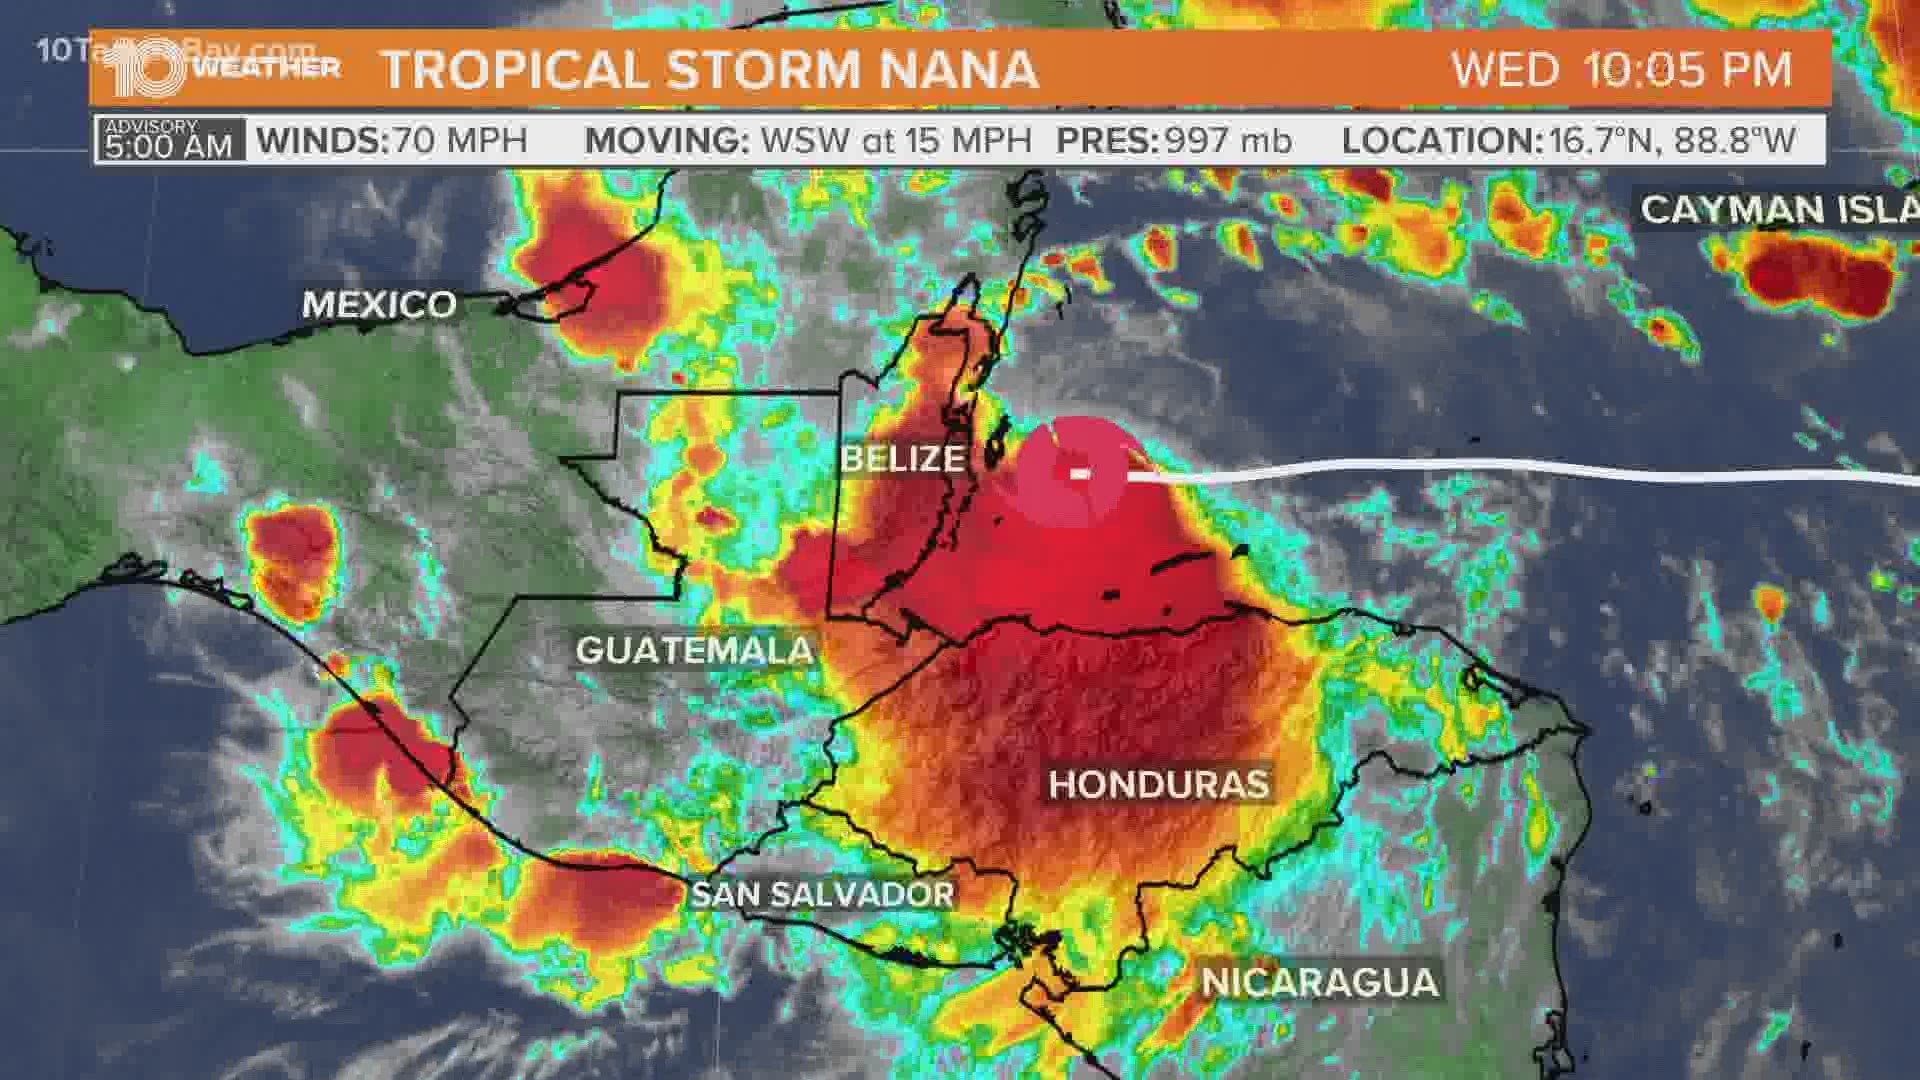 The 2020 Atlantic Hurricane Season is heating up and 10 Tampa Bay is tracking the tropics.